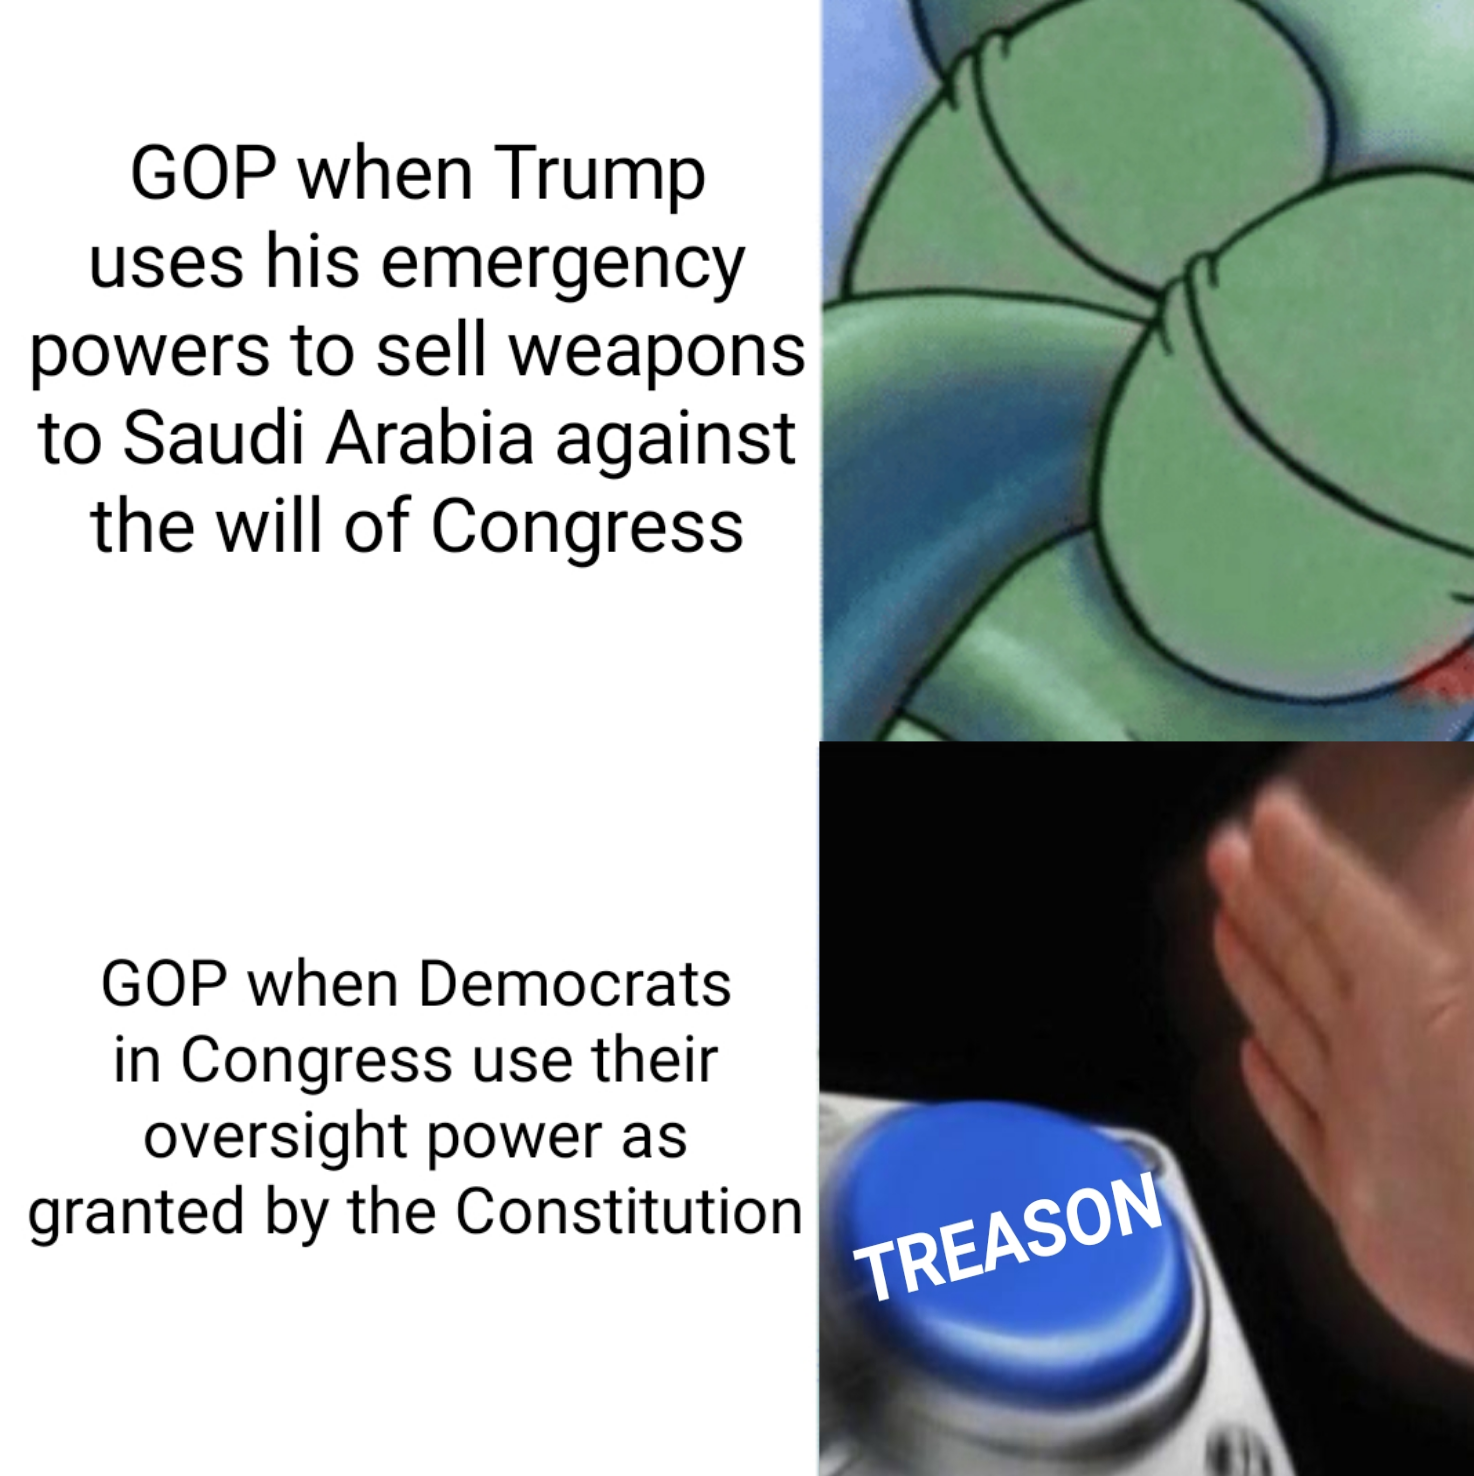 material - Gop when Trump uses his emergency powers to sell weapons to Saudi Arabia against the will of Congress Gop when Democrats in Congress use their oversight power as granted by the Constitution Treason